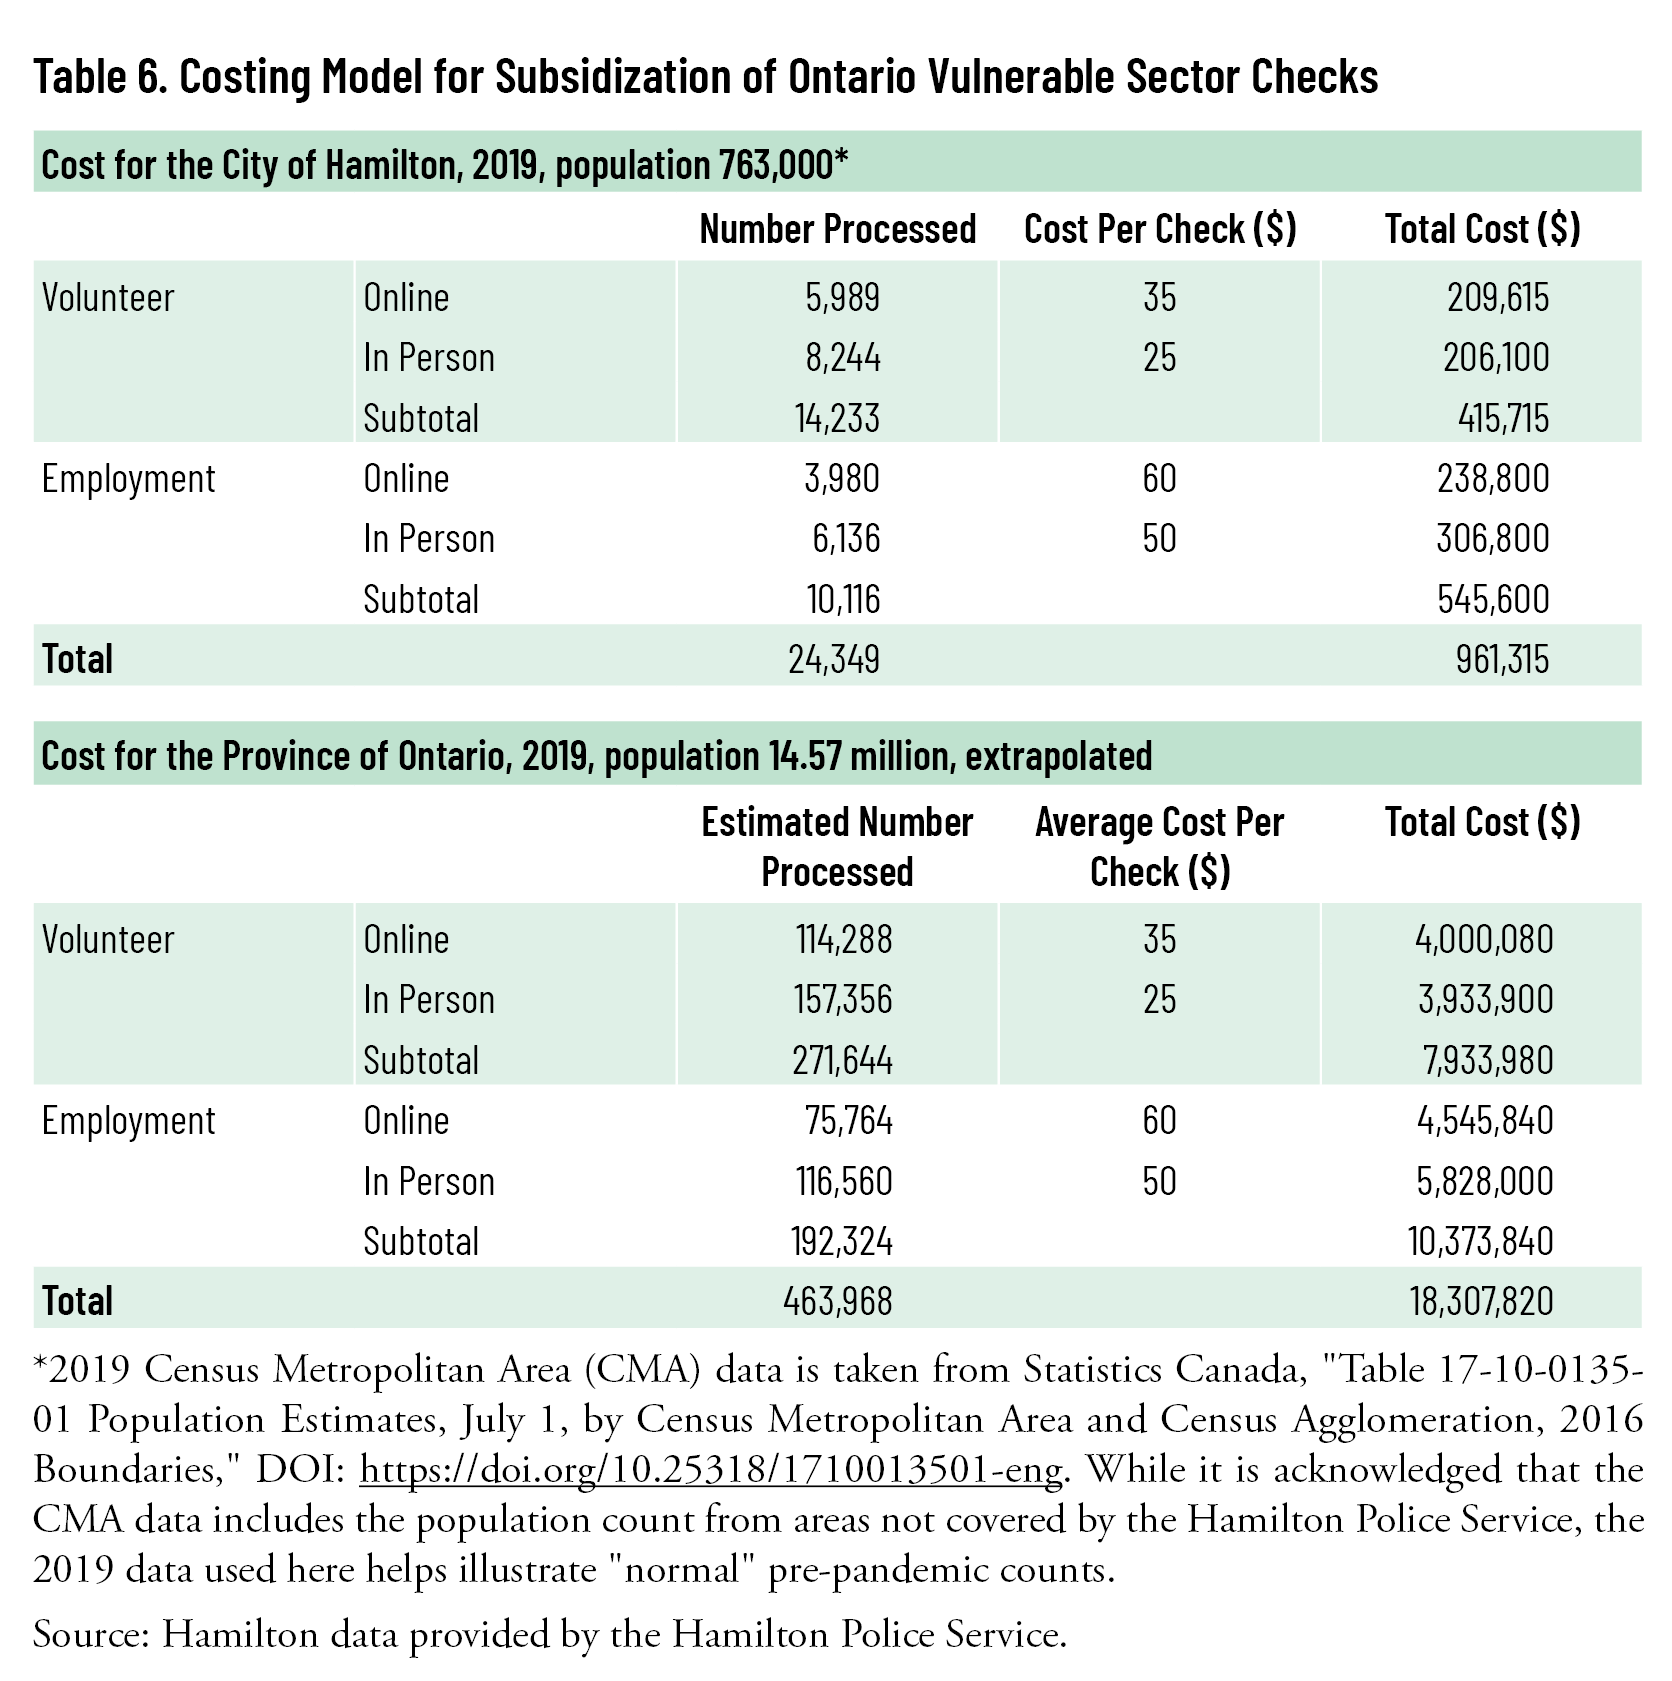 Table 6: Costing Model for Subsidization of Ontario Vulnerable Sector Checks